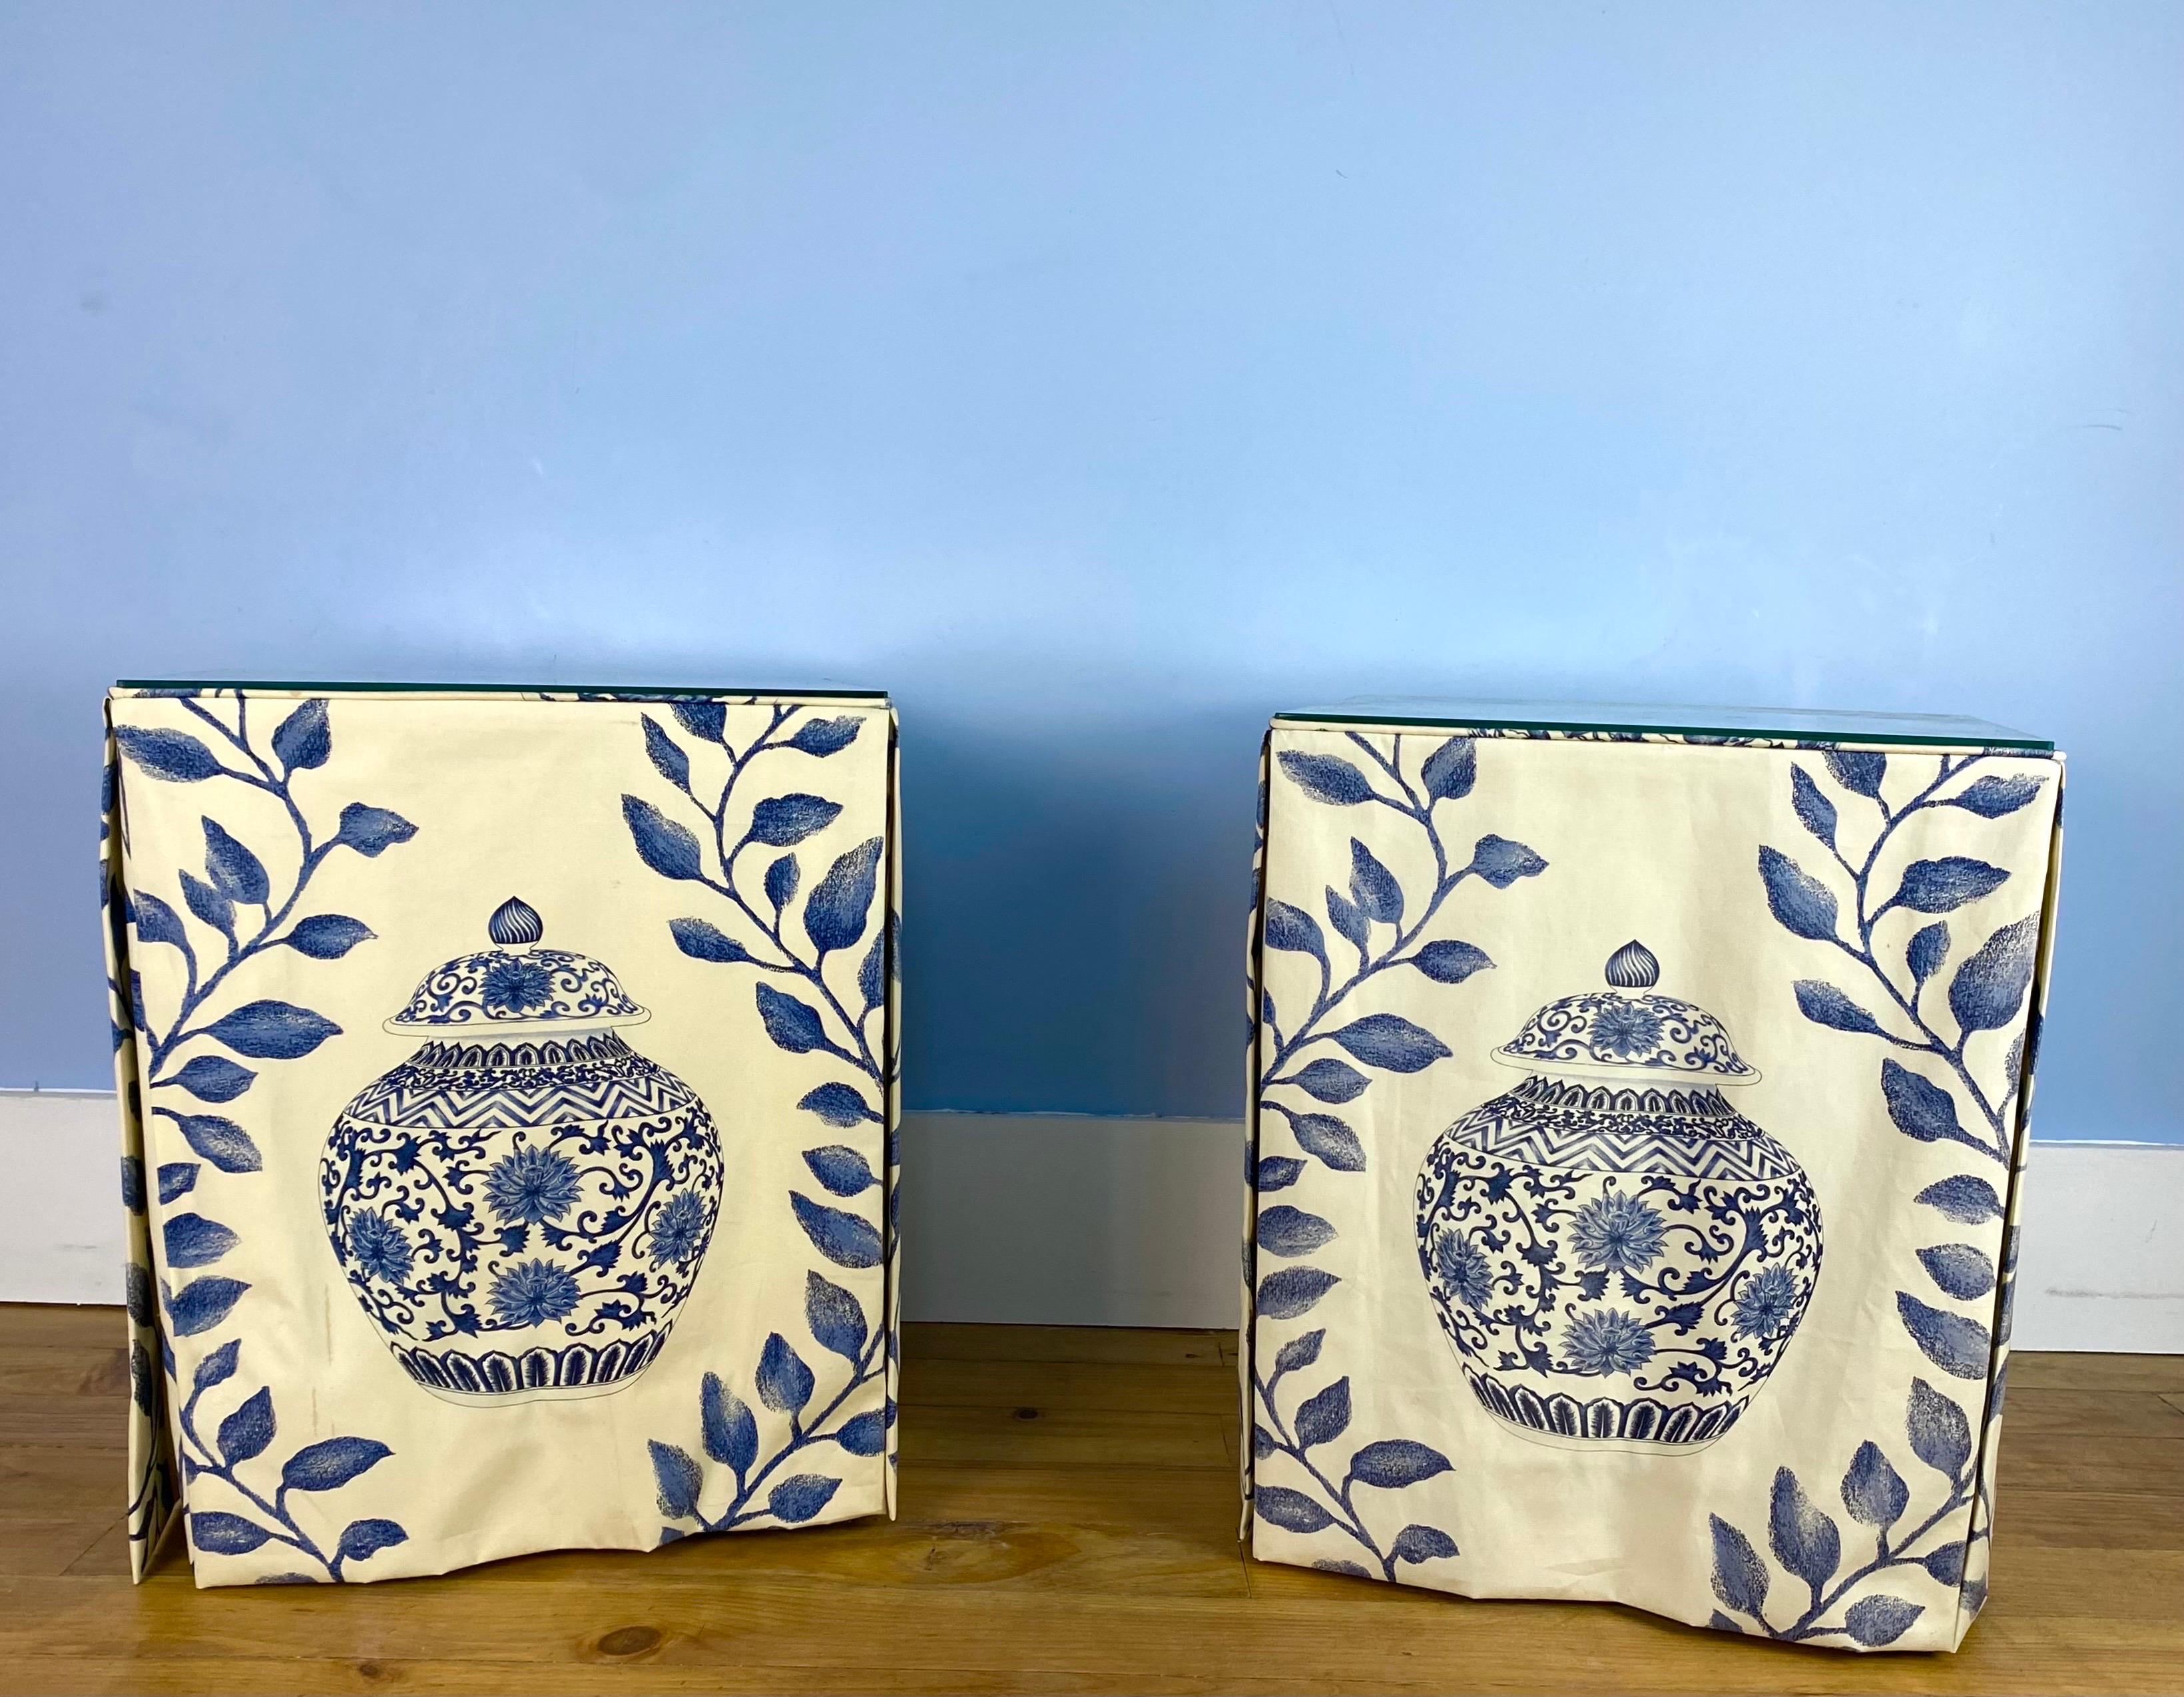 Elegant pair of bedside tables or side tables in fabric. A glass top is placed on each of the bedside tables.
Magnificent quality of white/ecru and blue fabric decorated with vases, fruits and foliage.
Blue white Chinese porcelain pattern.
This pair